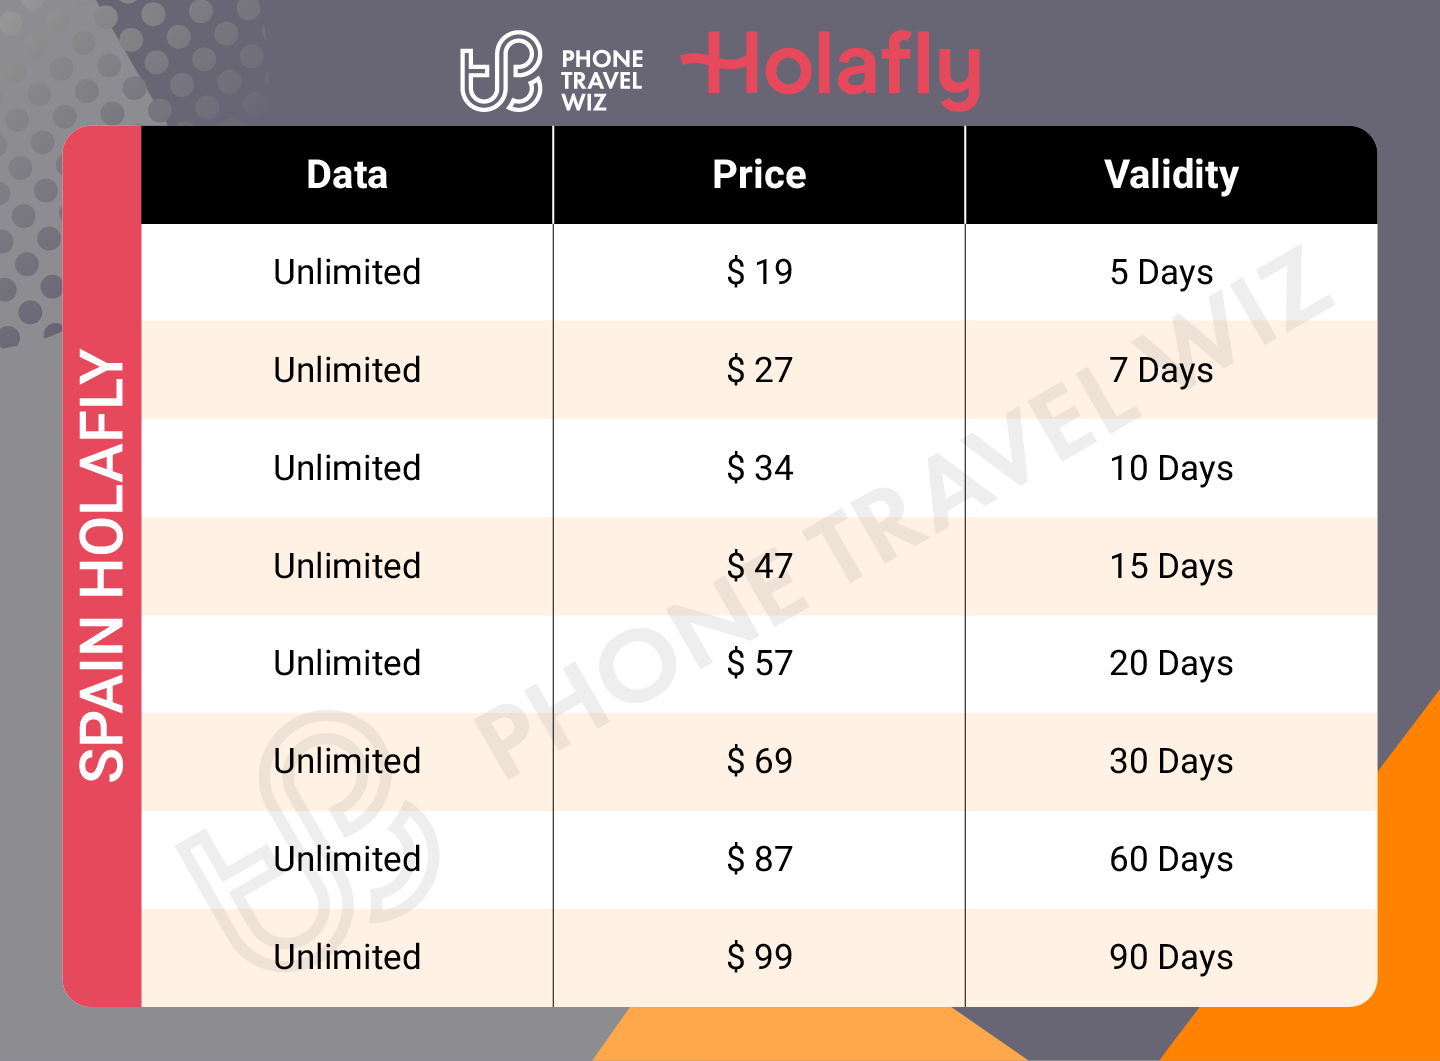 Holafly Spain eSIM Price & Data Details Infographic by Phone Travel Wiz